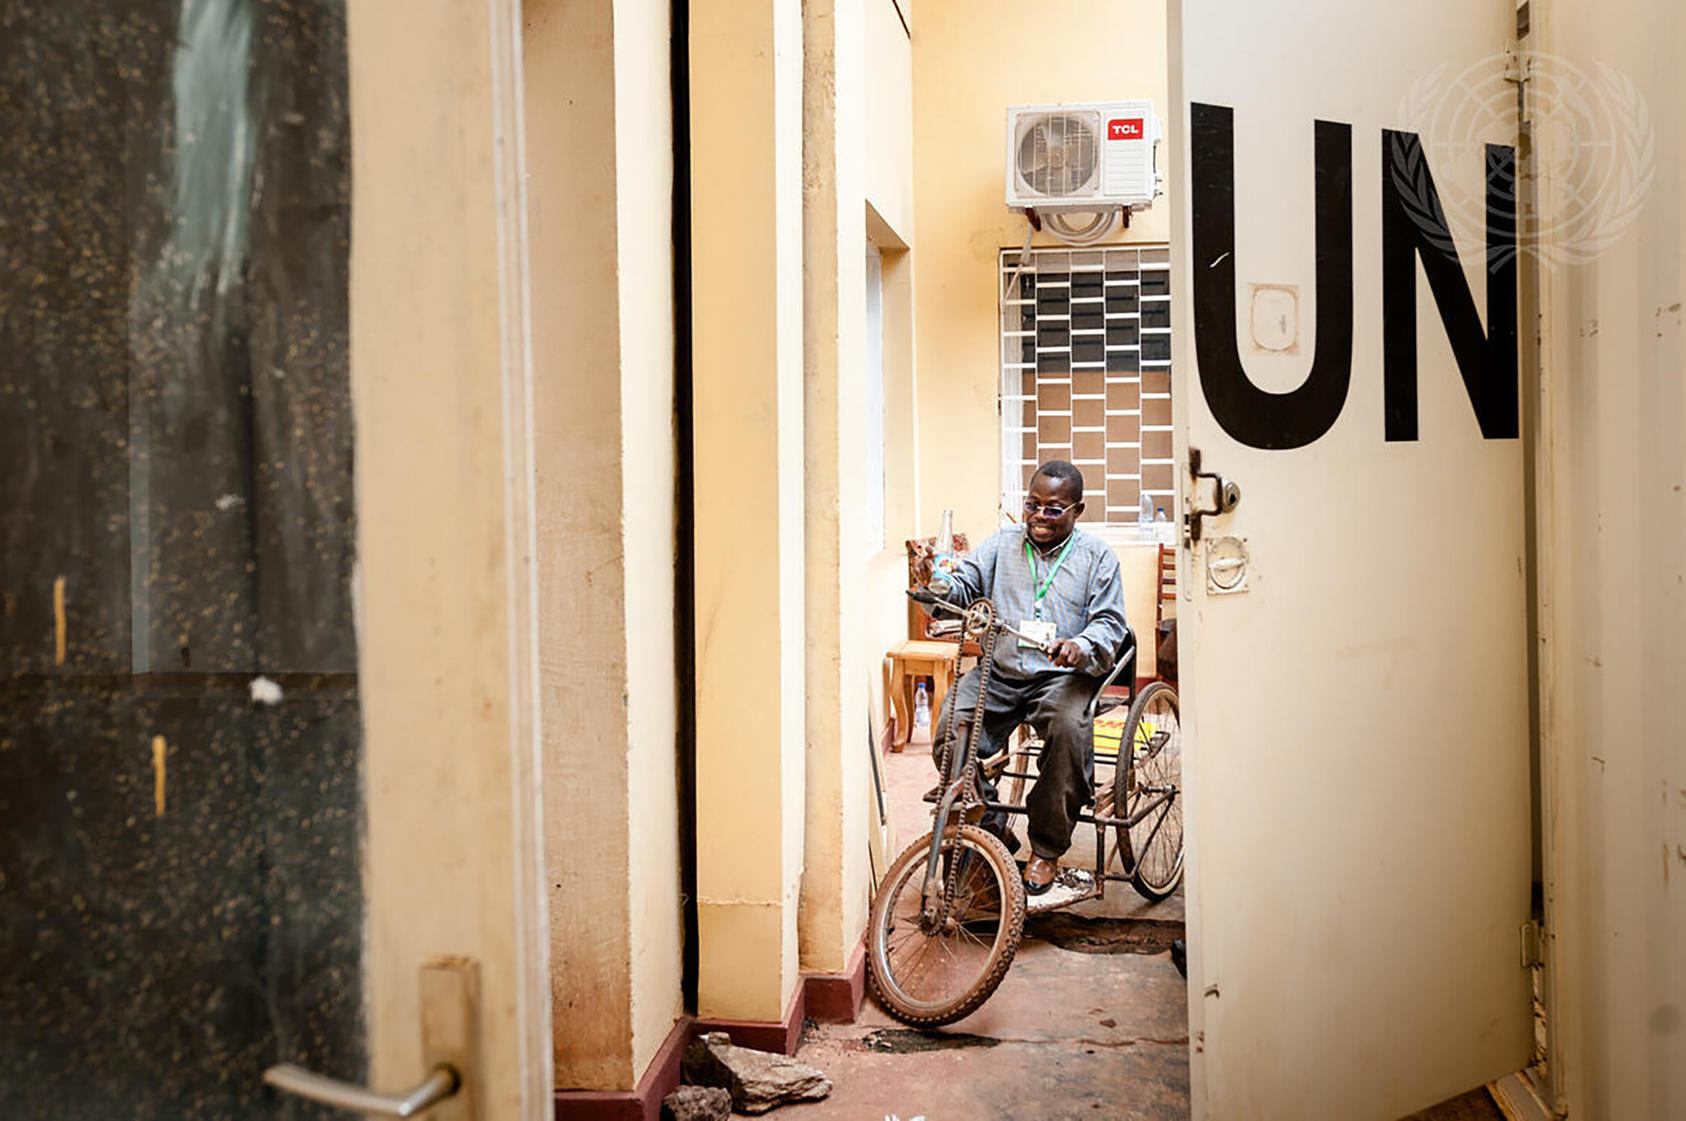 A Bangui National Forum participant leaves a radio station after an interview that highlighted the effects of the conflict on persons with disabilities in Central African Republic. May 7, 2015. (Catianne Tijerinn/U.N. Photo)